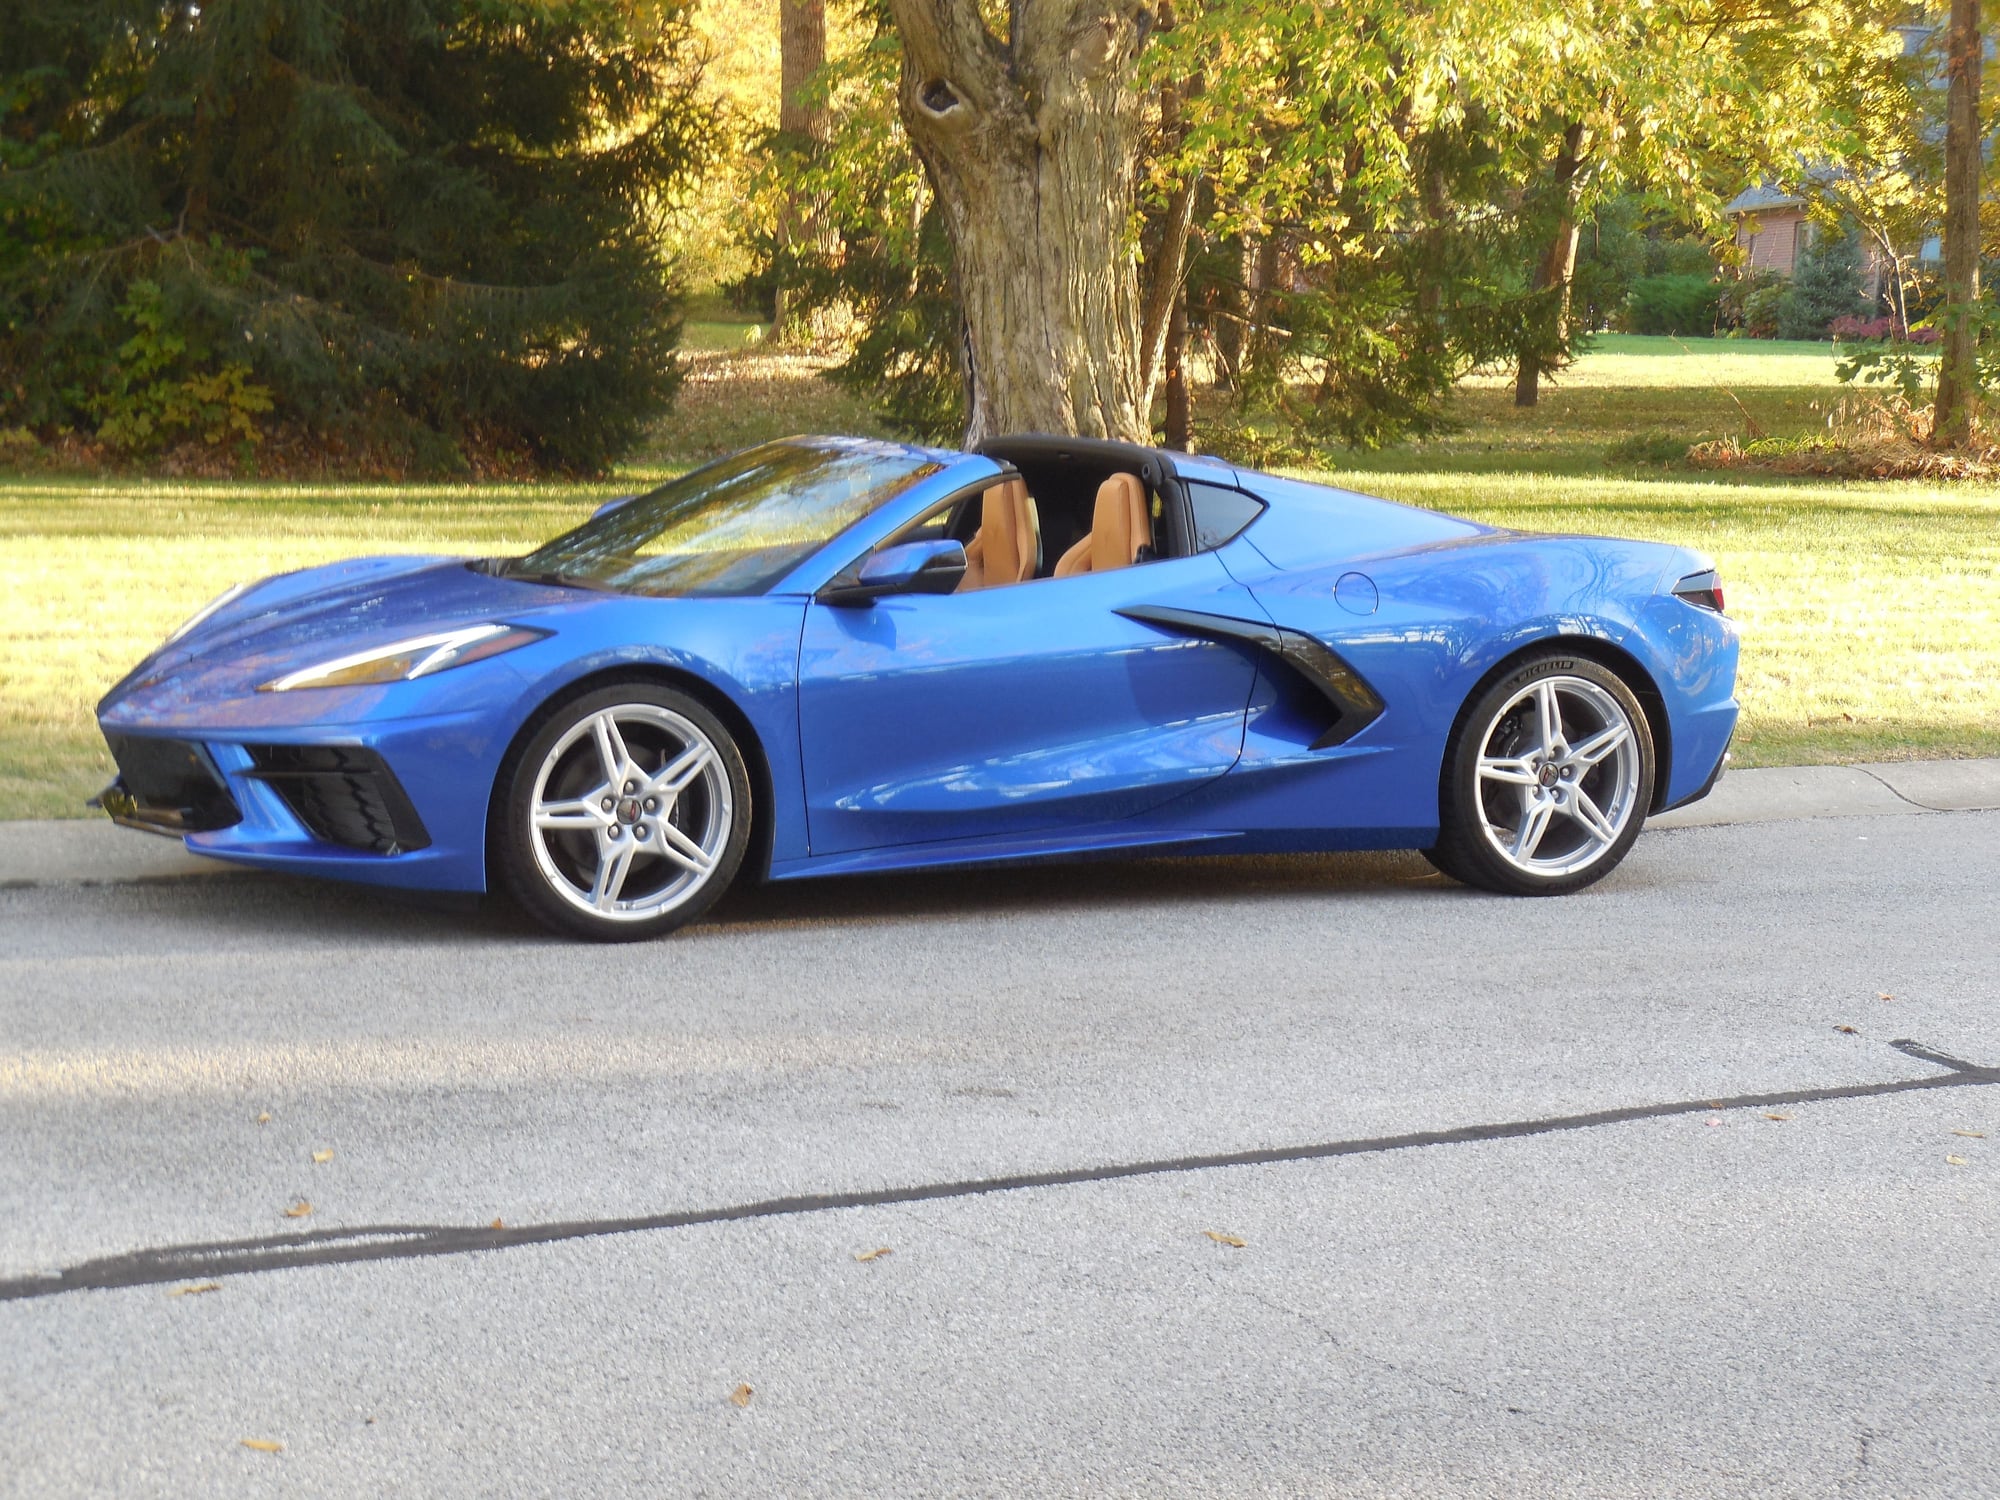 fs-for-sale-1500-gm-card-rebate-for-1000-on-the-2020-corvette